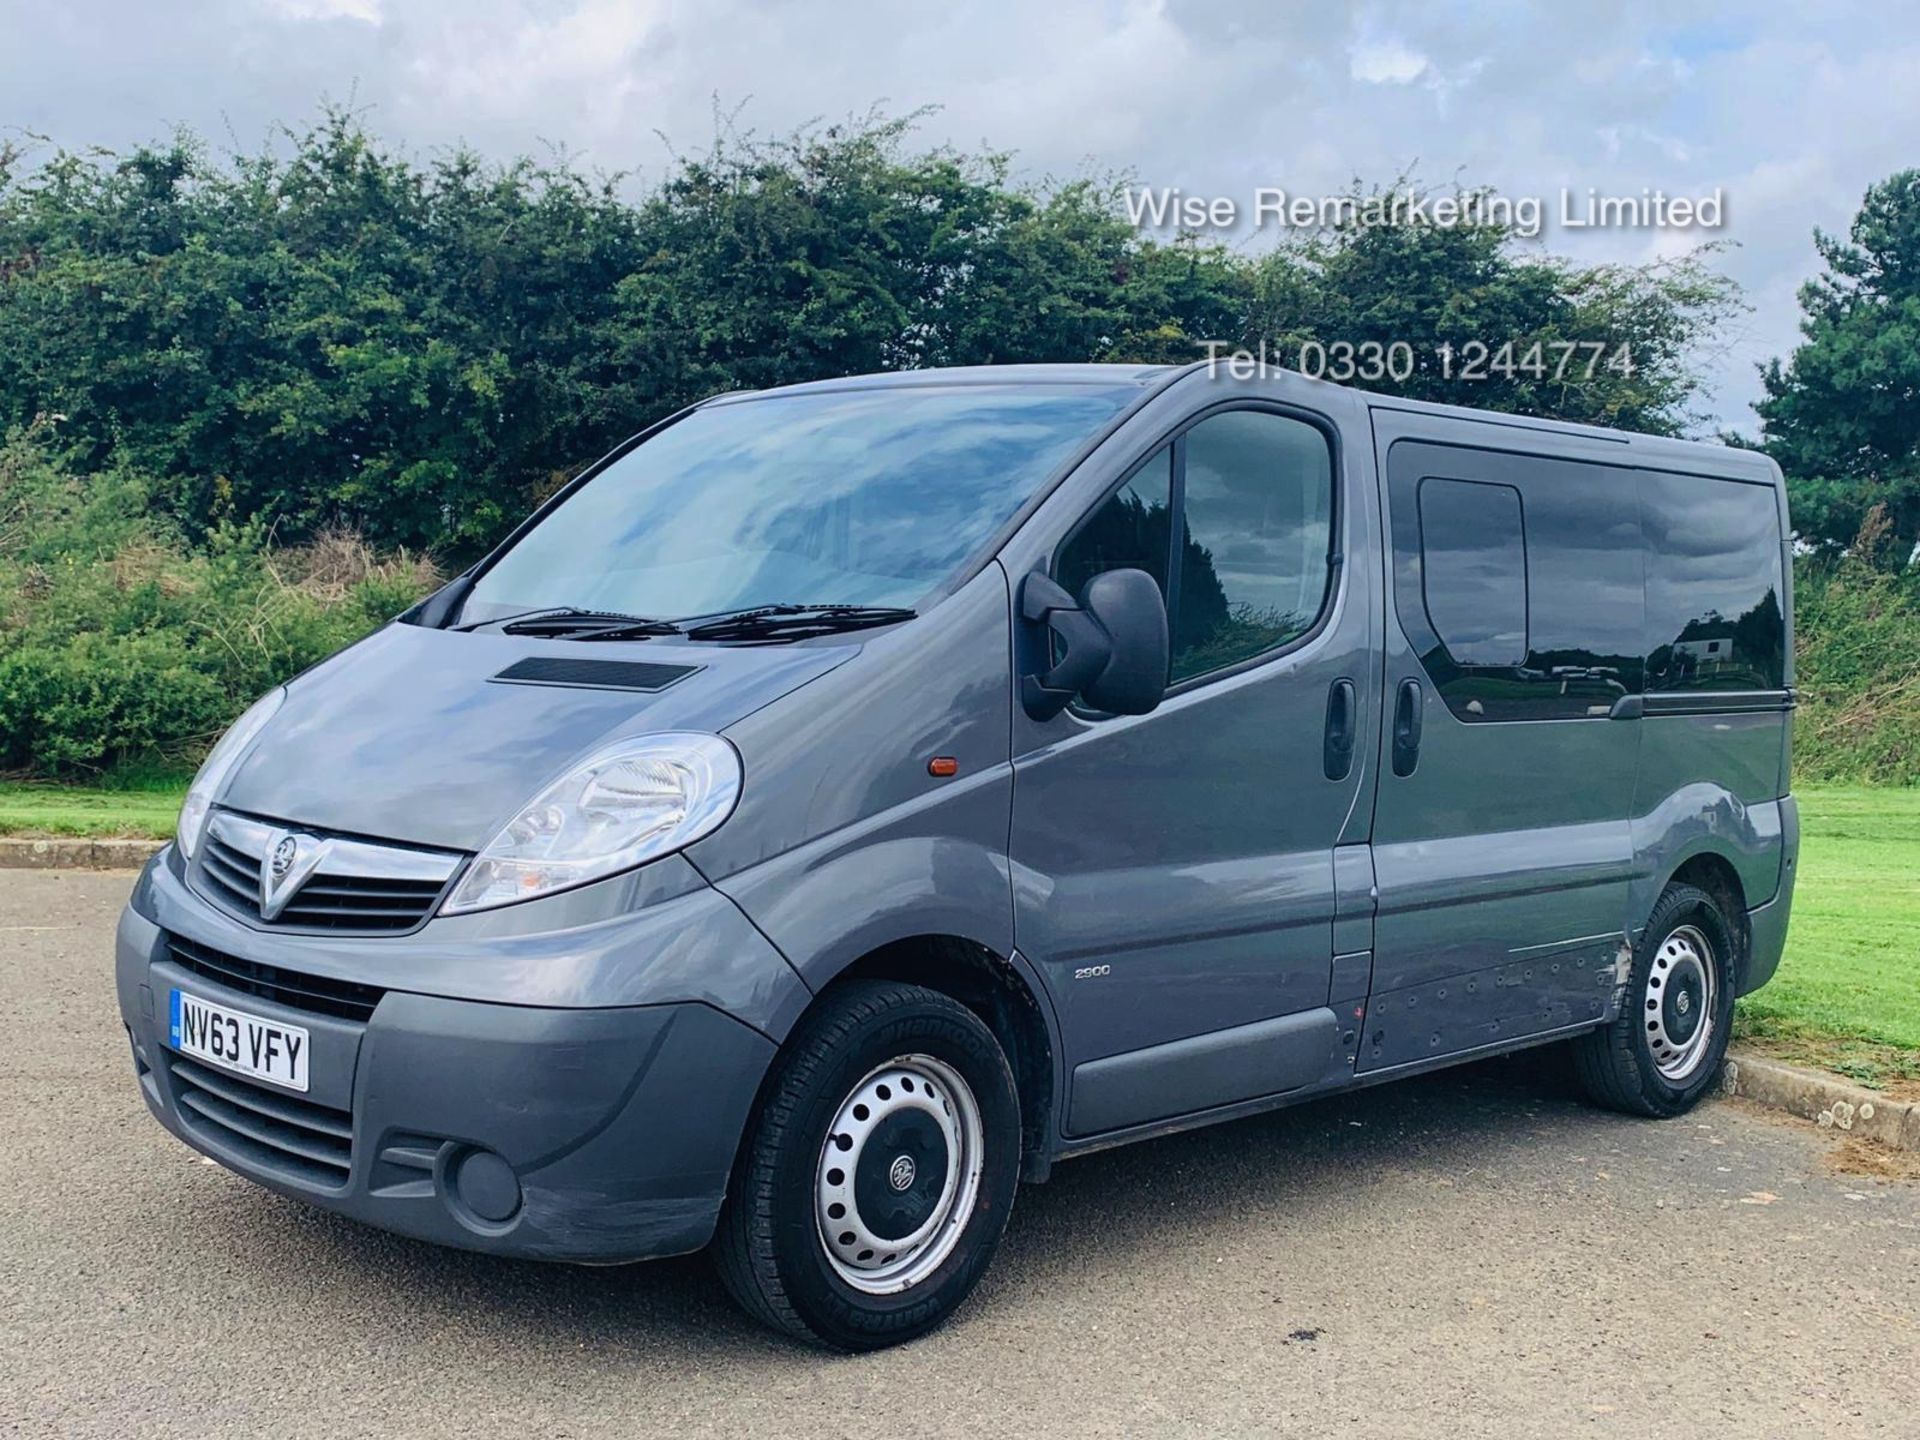 Vauxhall Vivaro 2.0 CDTI 2900 Minibus - 2014 Model - Wheel Chair Access - 1 Owner From New -History - Image 6 of 21